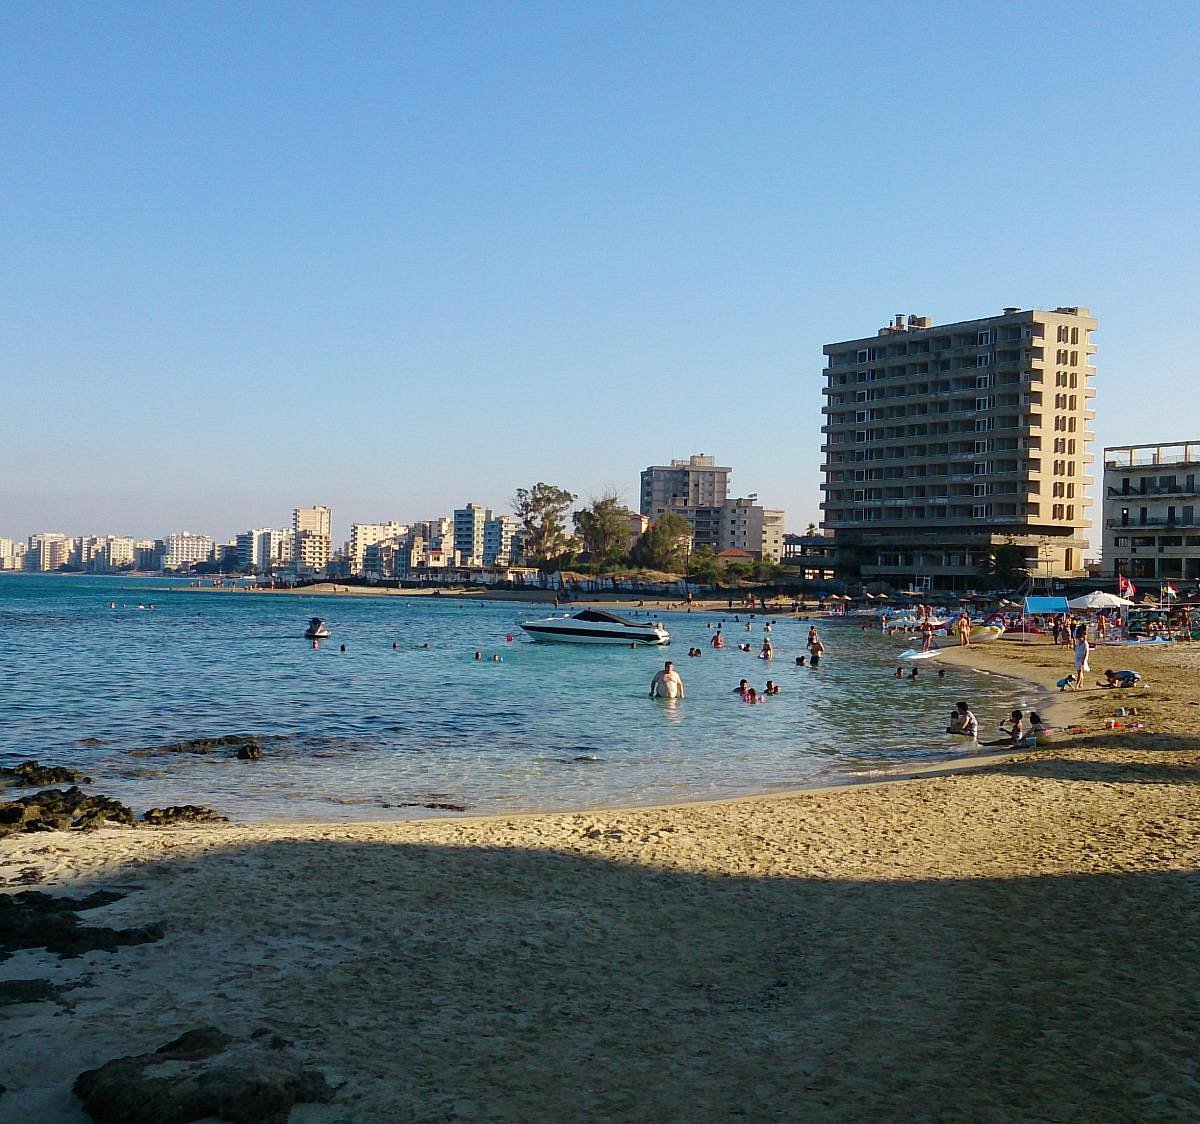 Famagusta Cyprus: This picturesque island used to be a holiday